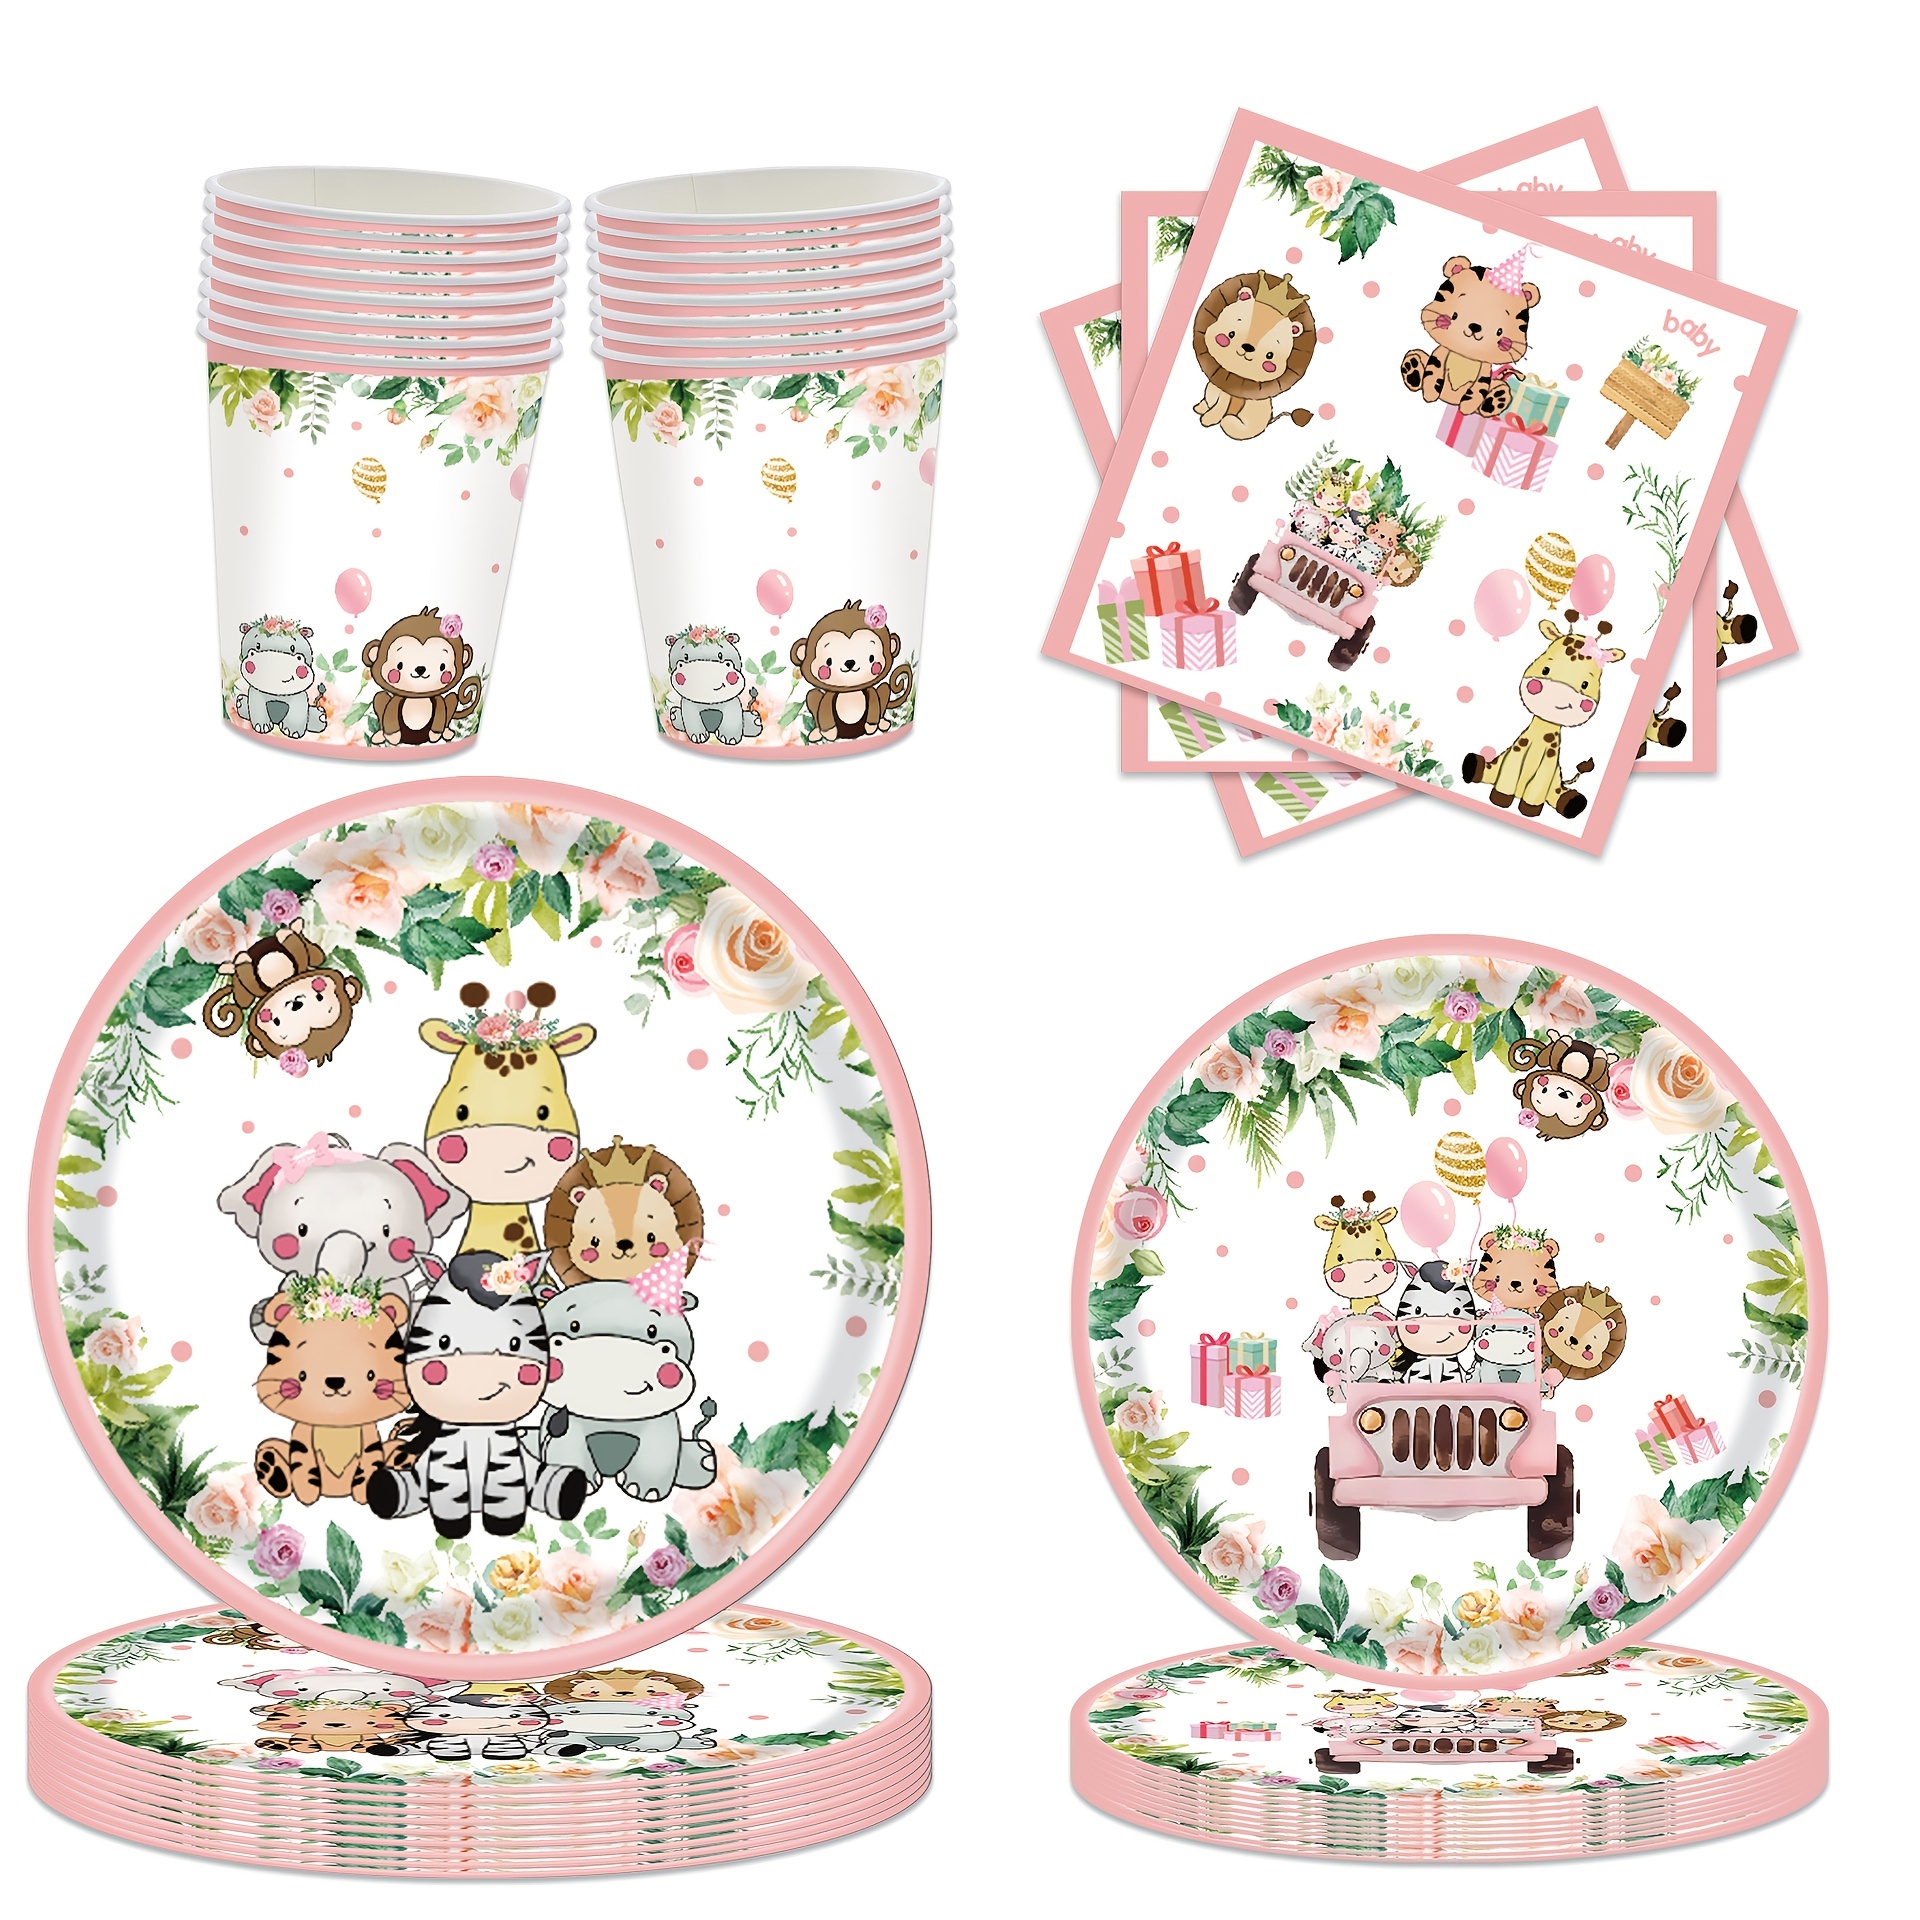 

Wild 1 Birthday Decorations Plates Set For 10 Guests Safari Jungle Theme Paper Plates And Cups And Napkins Sets Boys Birthday Party Supplies For Girl Easter Gift Easter Gift